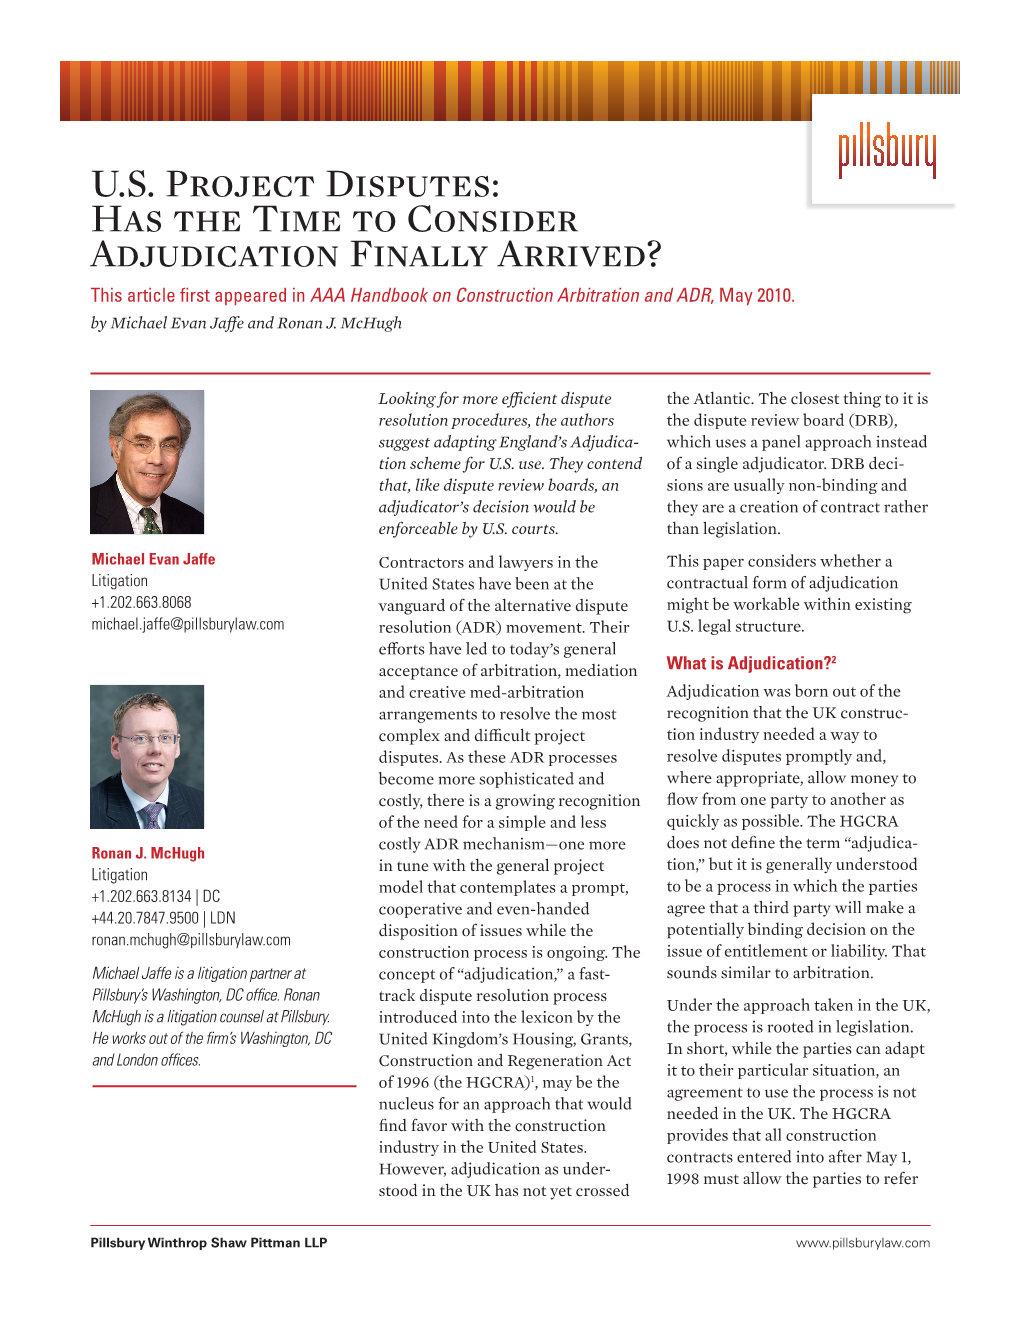 U.S. Project Disputes: Has the Time to Consider Adjudication Finally Arrived? This Article First Appeared Inaaa Handbook on Construction Arbitration and ADR, May 2010